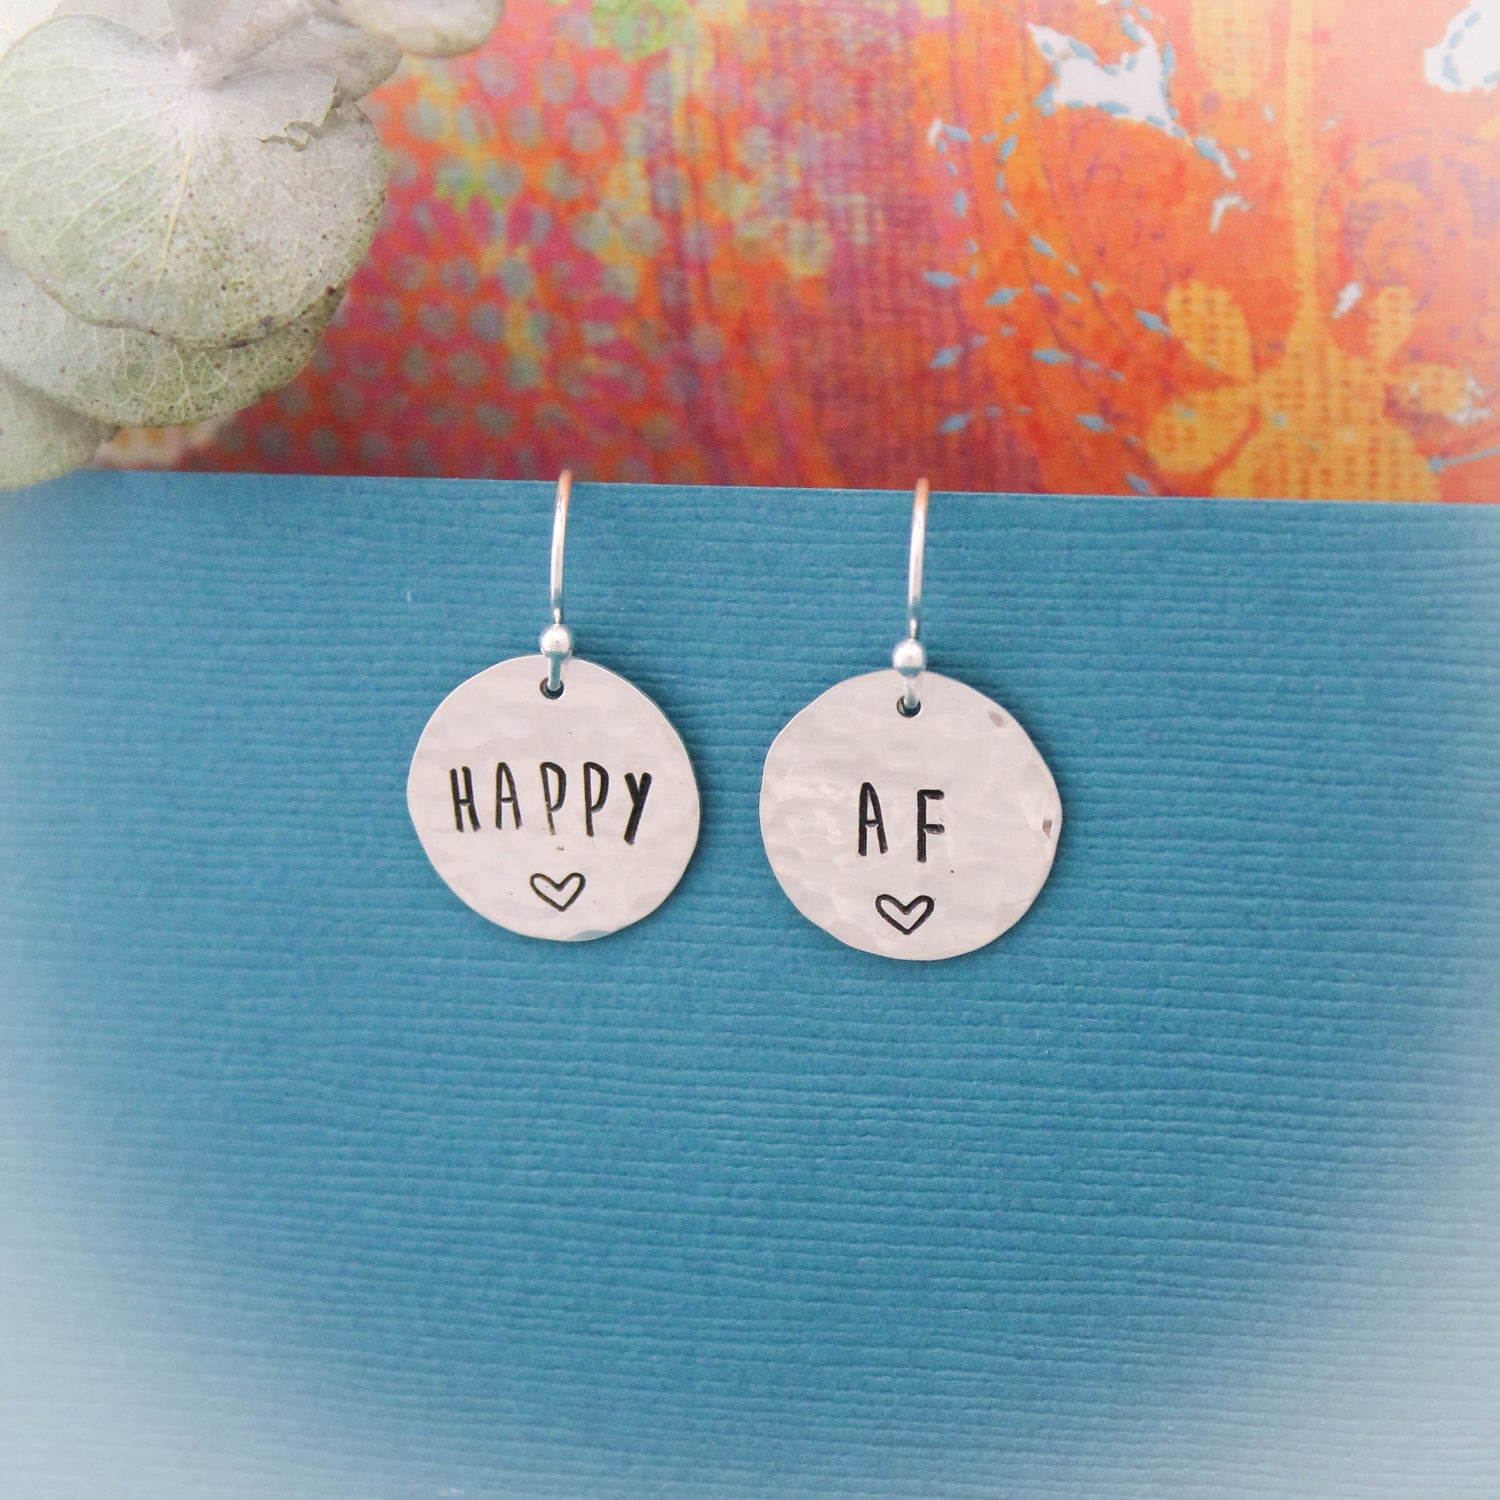 Happy AF Earrings in Sterling Silver, Motivational Inspirational Jewelry, Gifts for Her, Happy As Fuck Jewelry, Curse Word Jewelry Gift